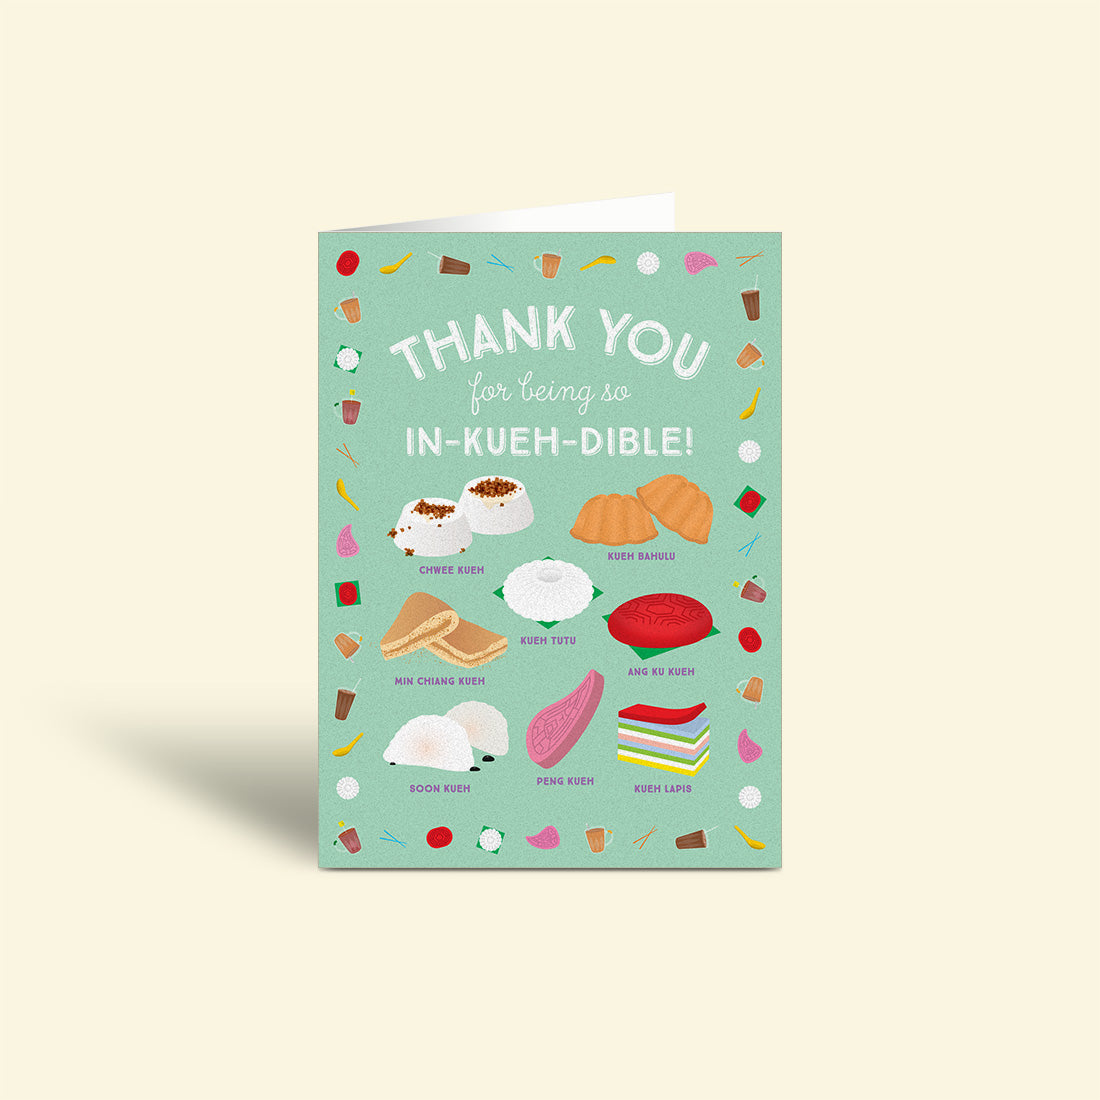 Thank you Card – Inkuehdible